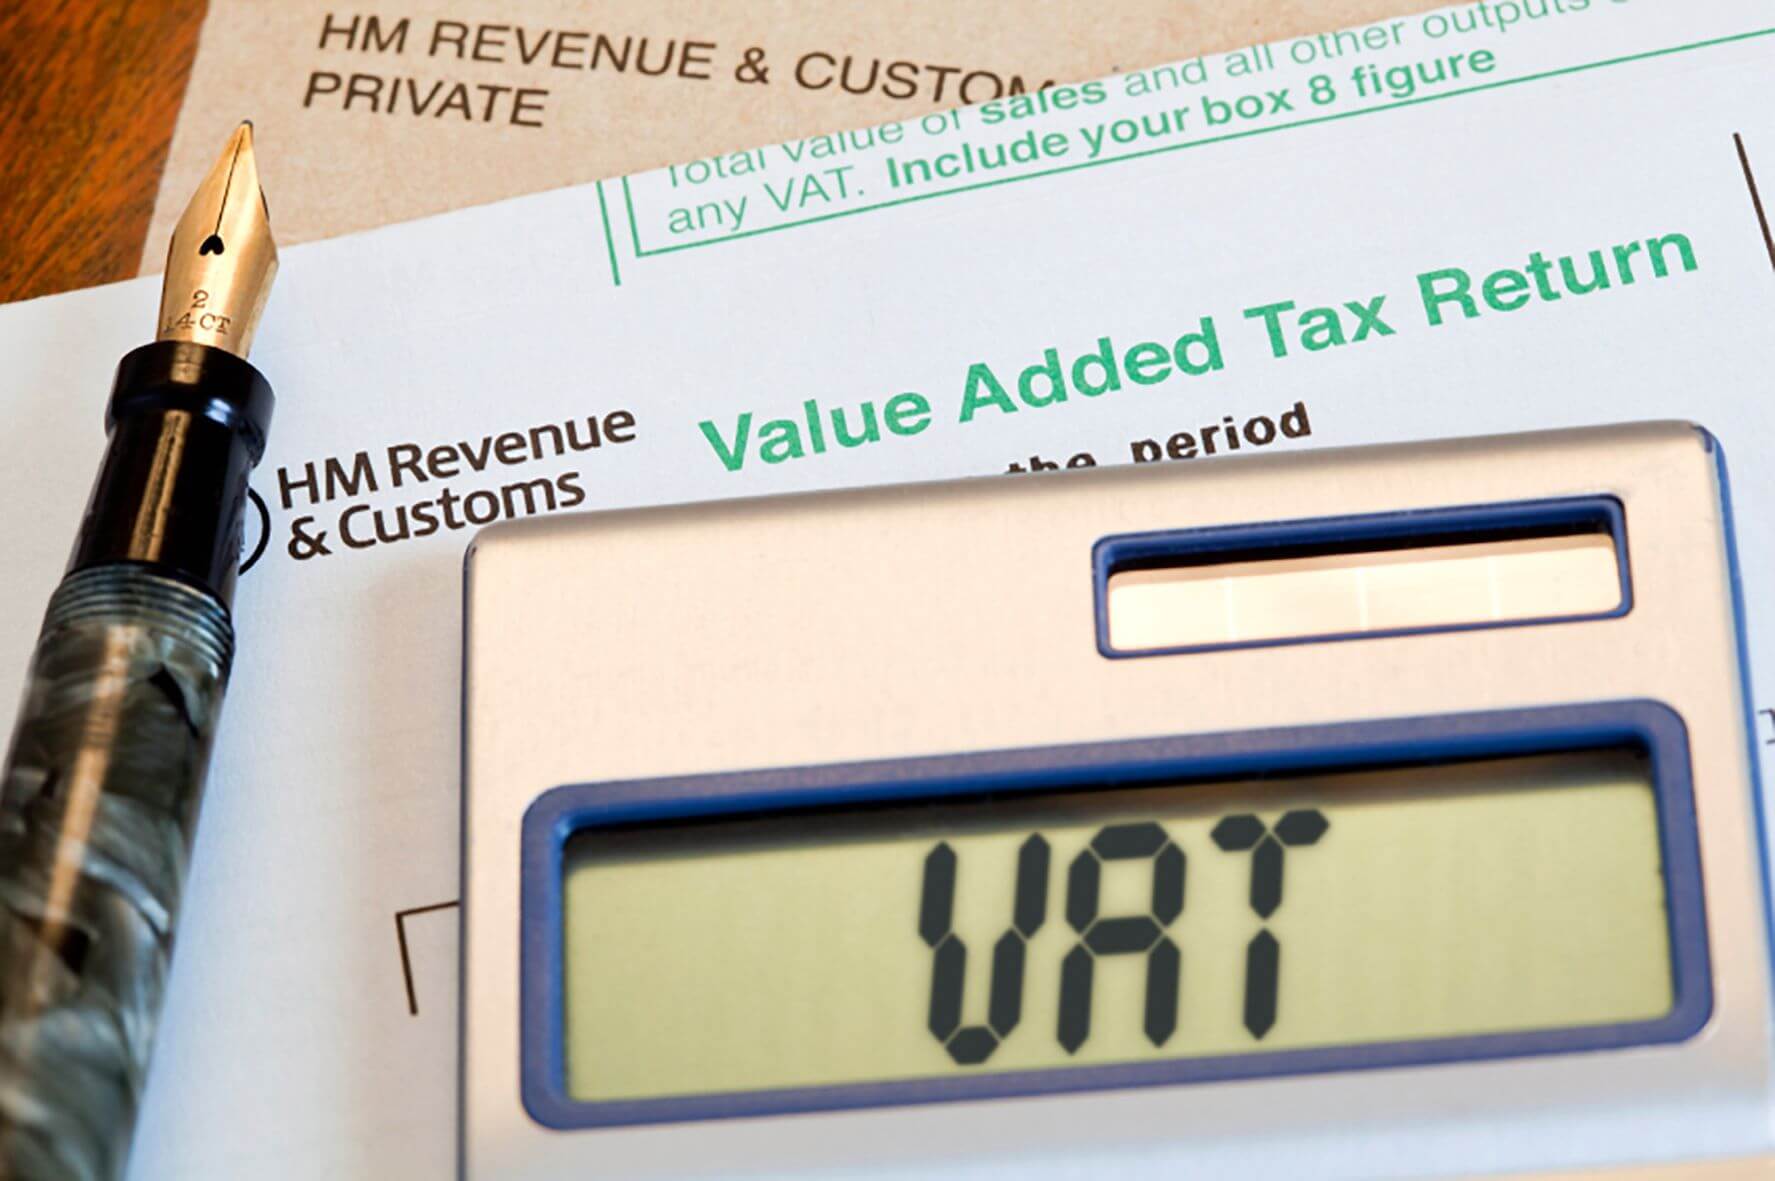 How to calculate the value added tax included and not included